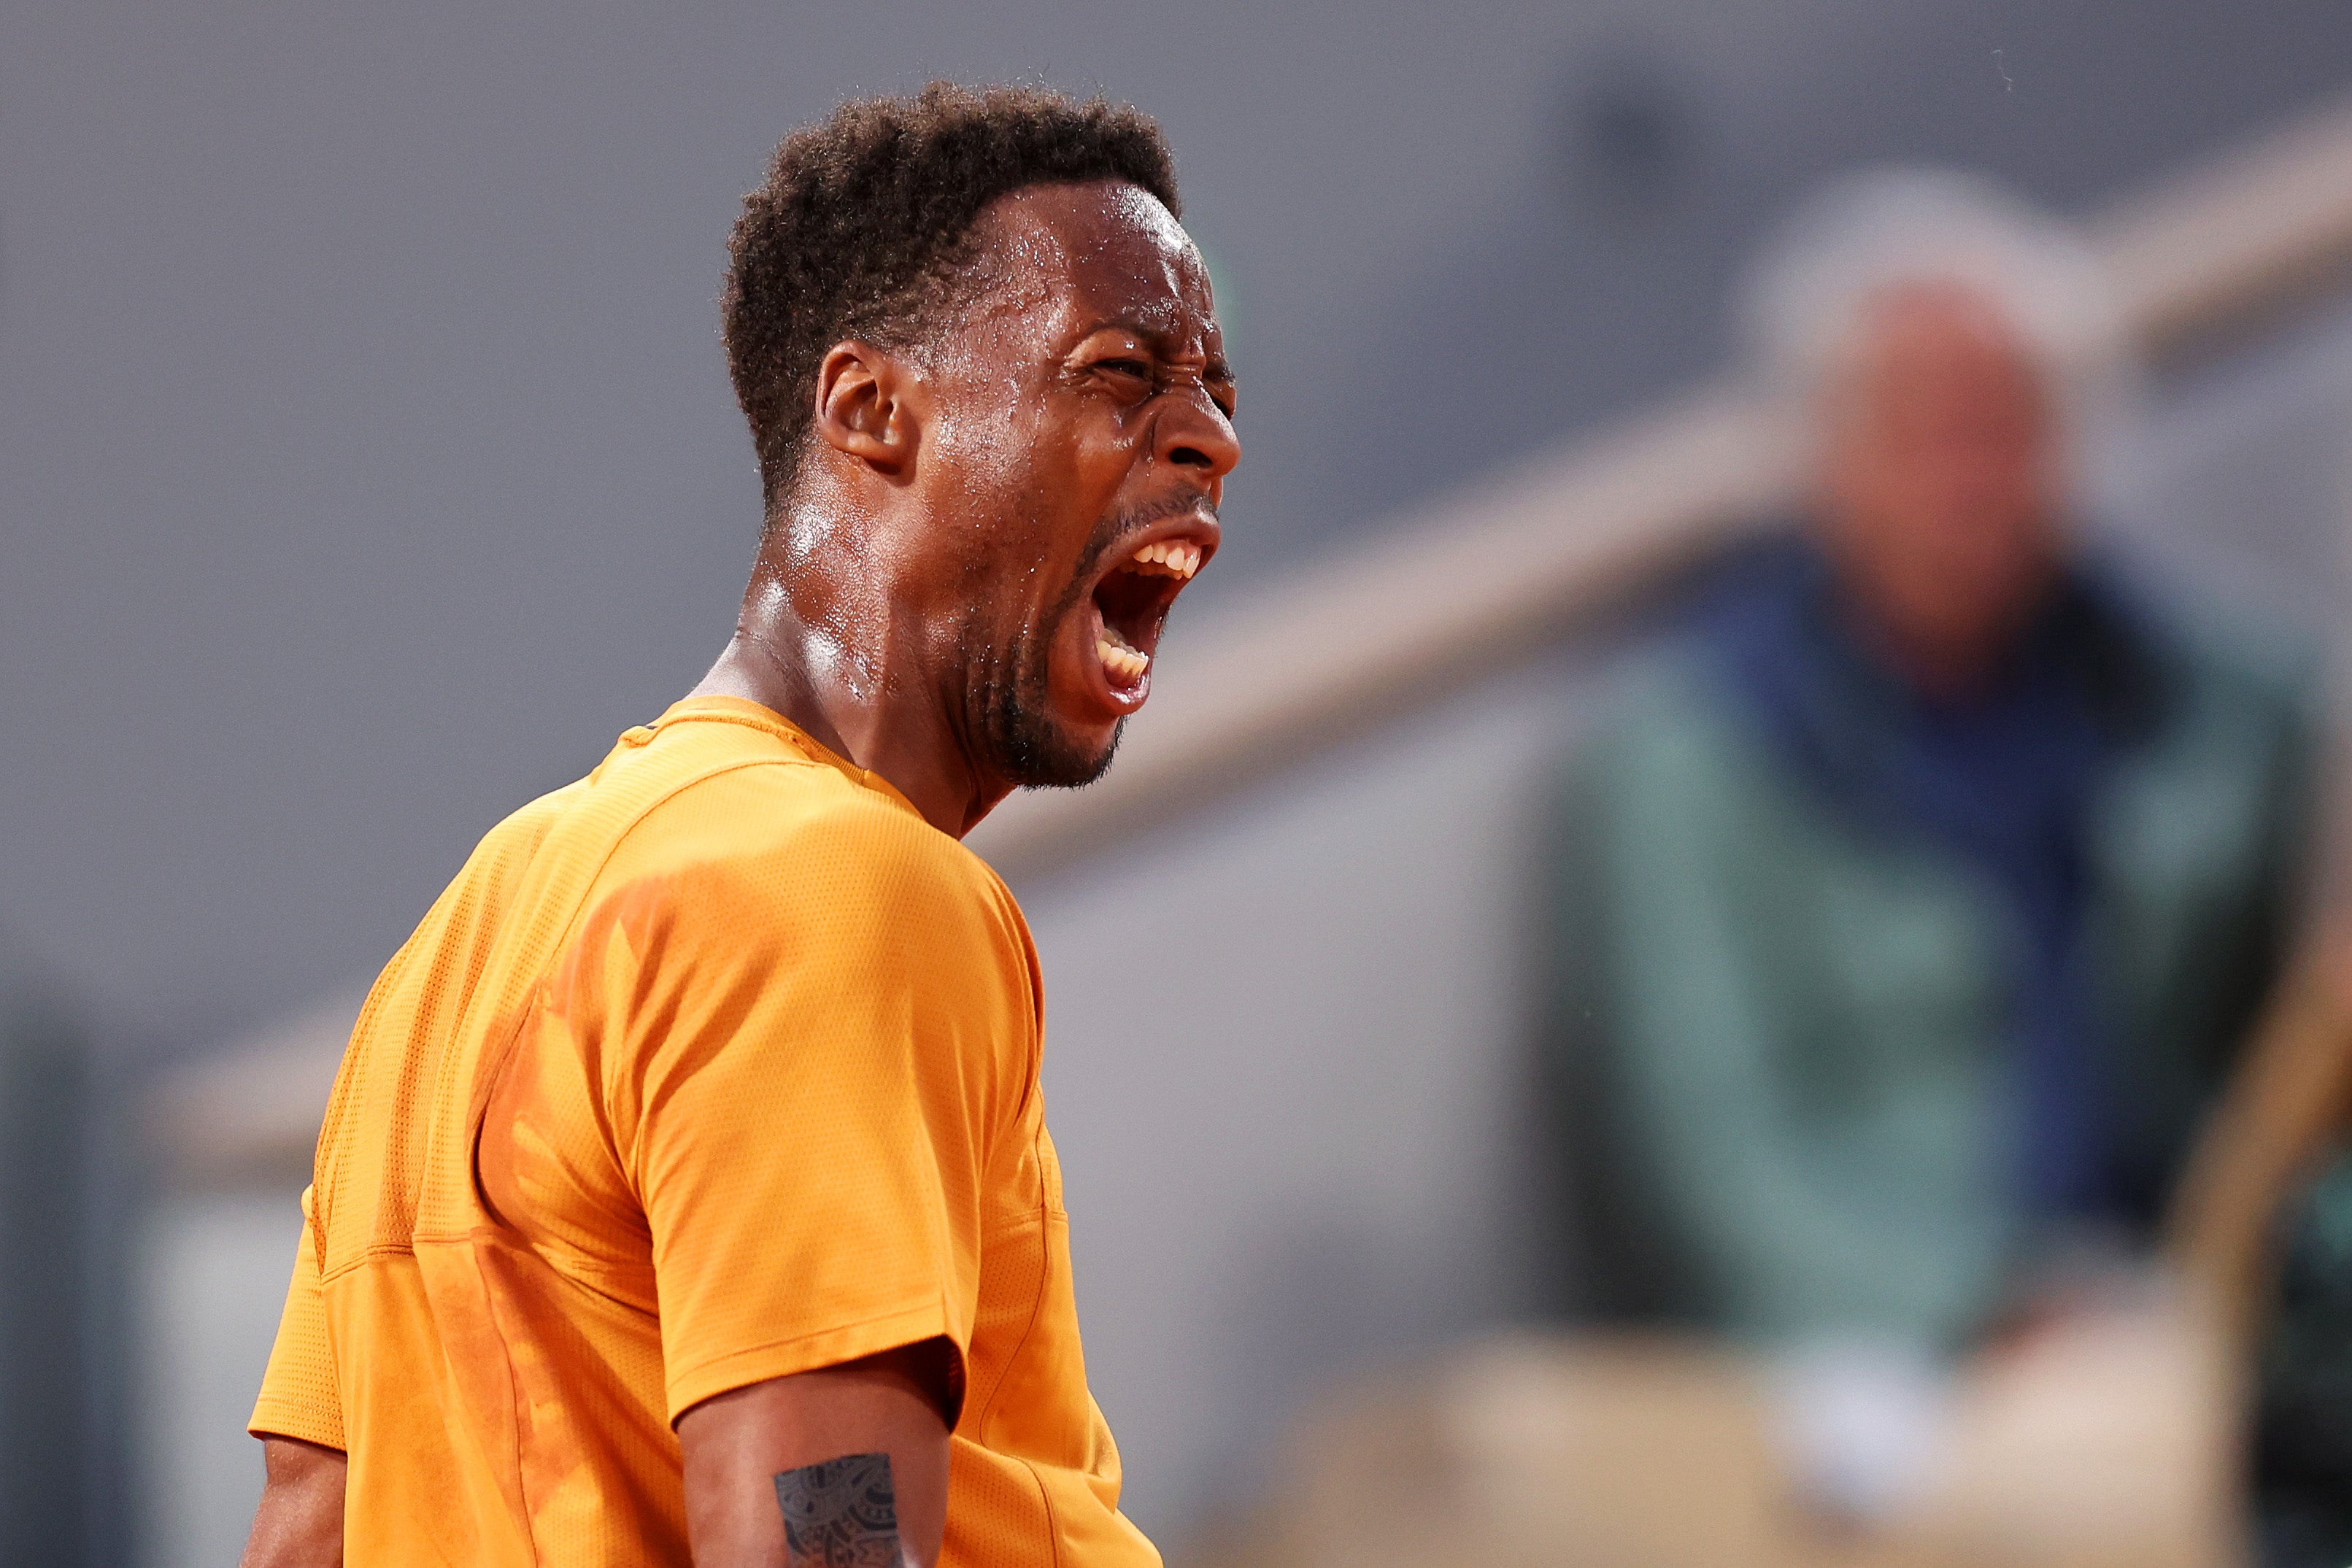 Gael Monfils became the oldest winner on the ATP Tour since Roger Federer when he lifted the title in Stockholm in October